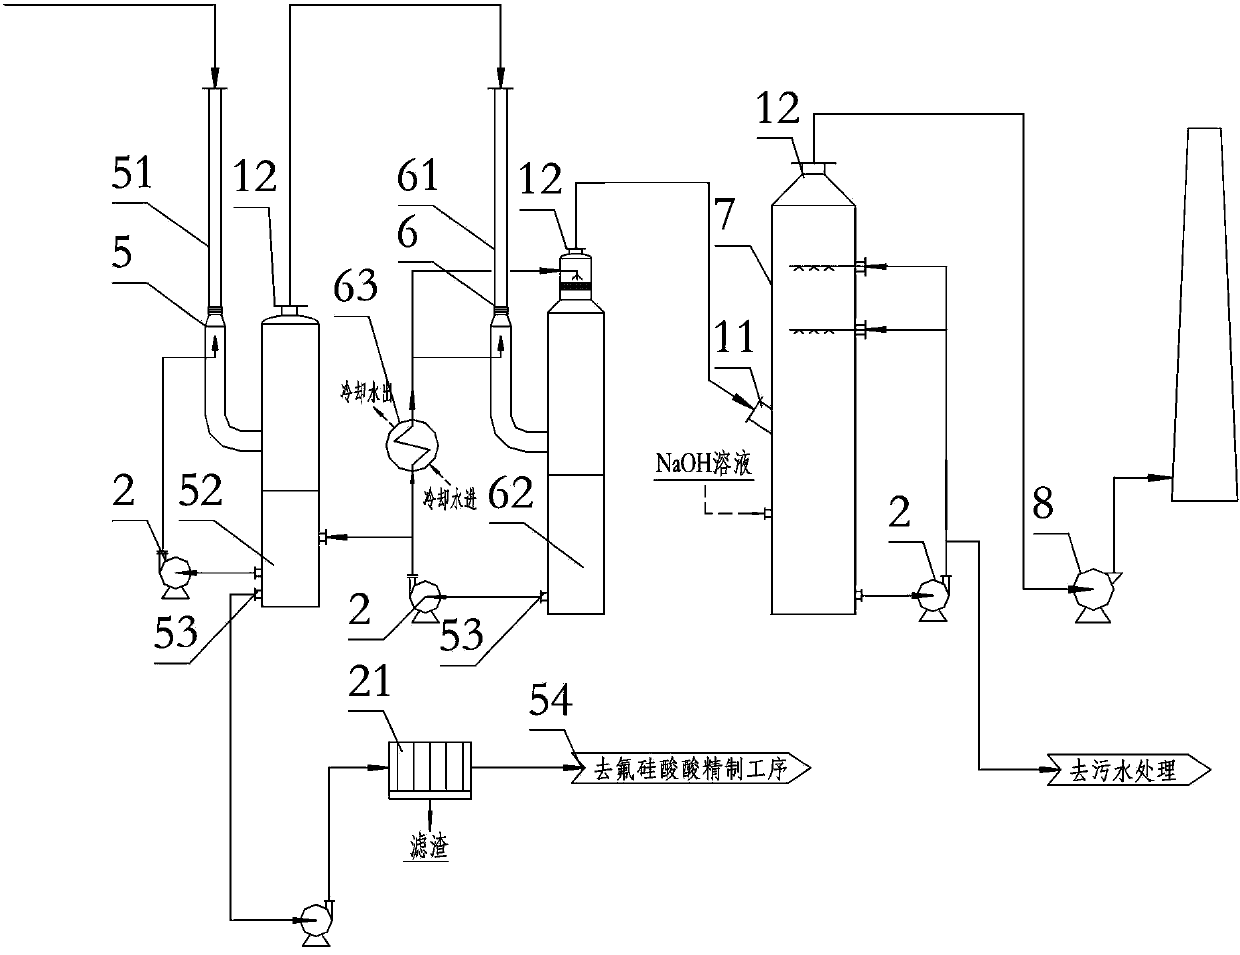 Equipment and process for recovery of fluorine from flue gas of hydration absorption of phosphorus in kiln-method phosphoric acid technology